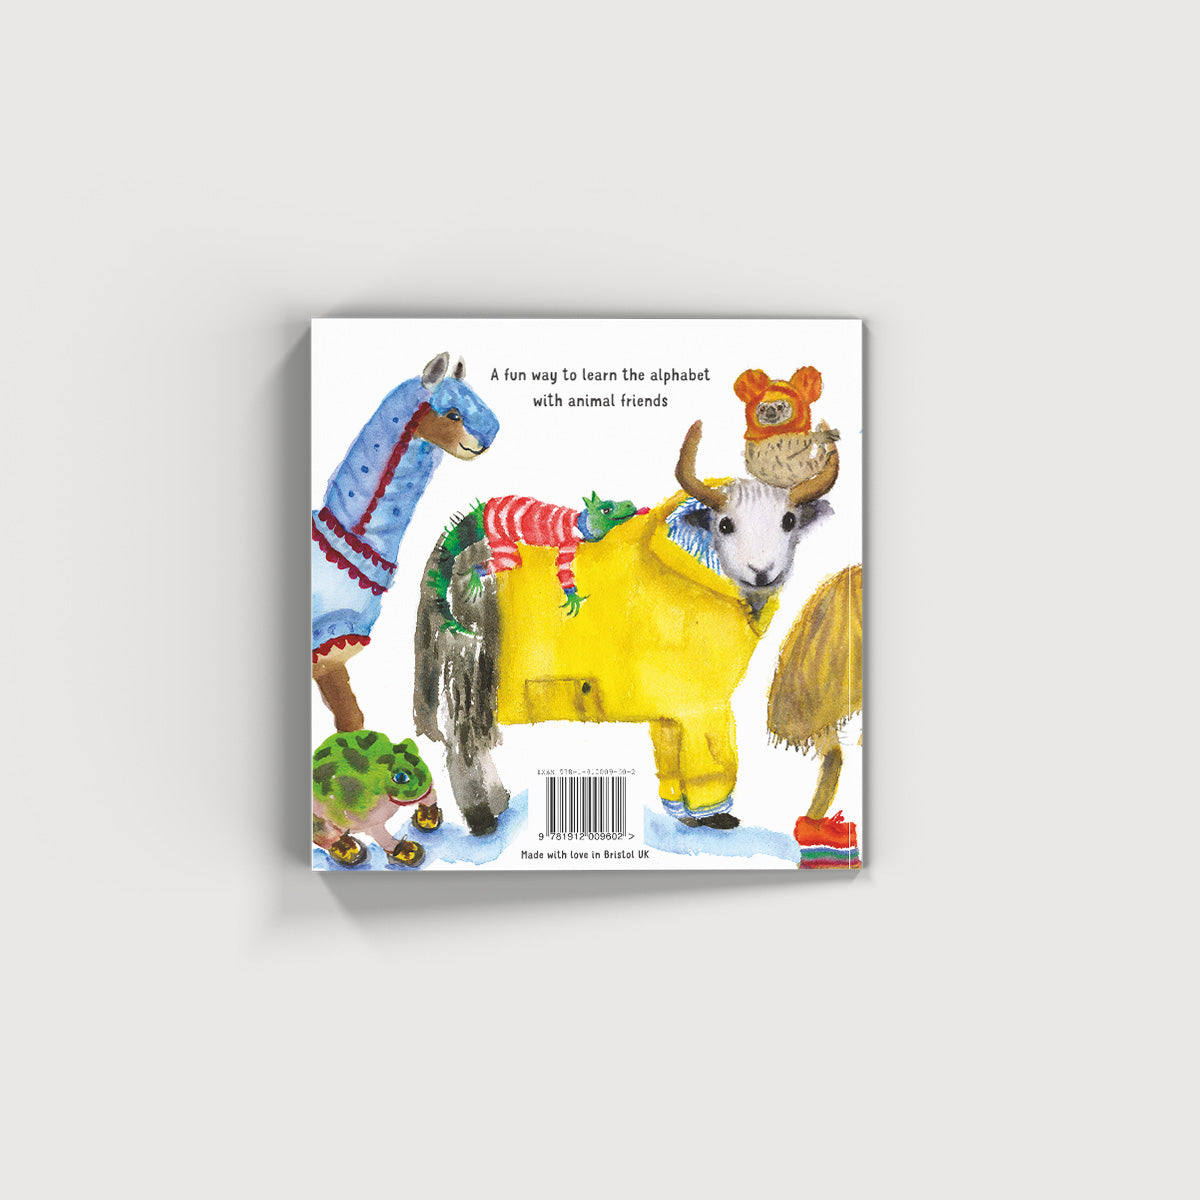 '' A fun way to learn the alphabet with animal friends'' book with watercolour animals on cover  